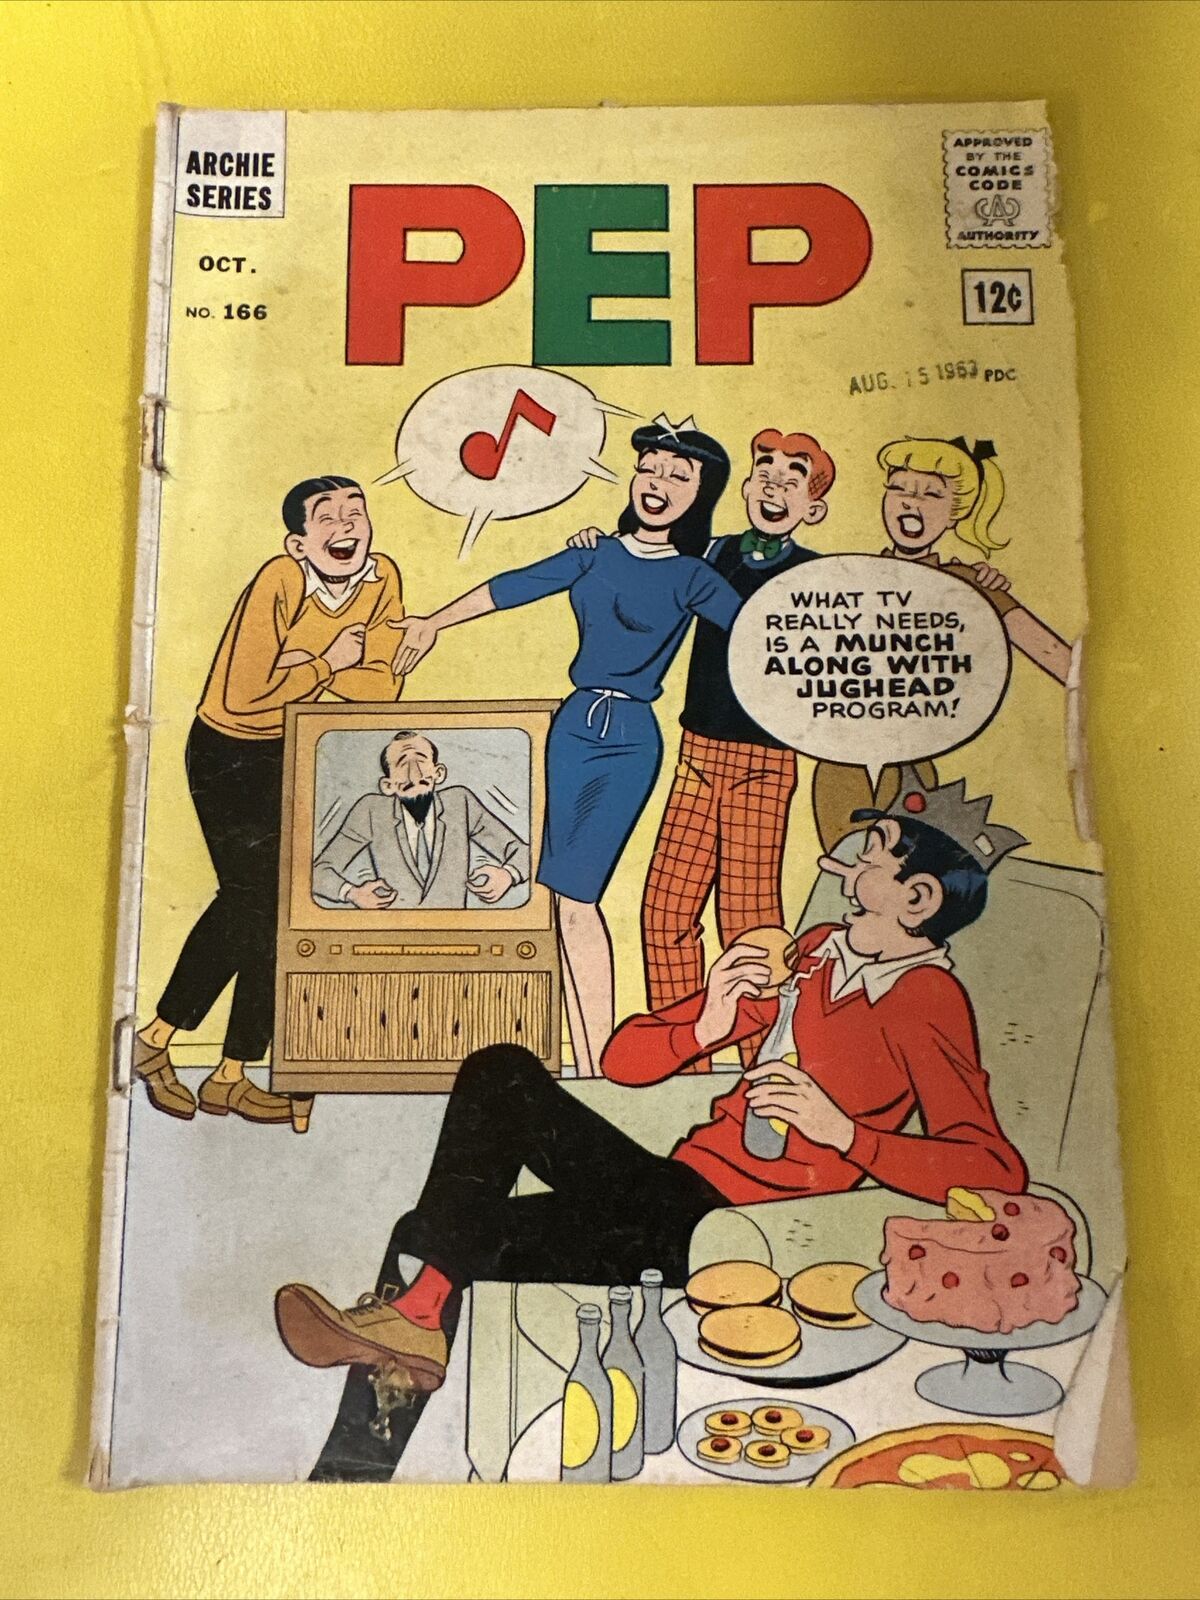 1963 PEP Archie Series Comic Book #166 Bagged & Boarded 🐶